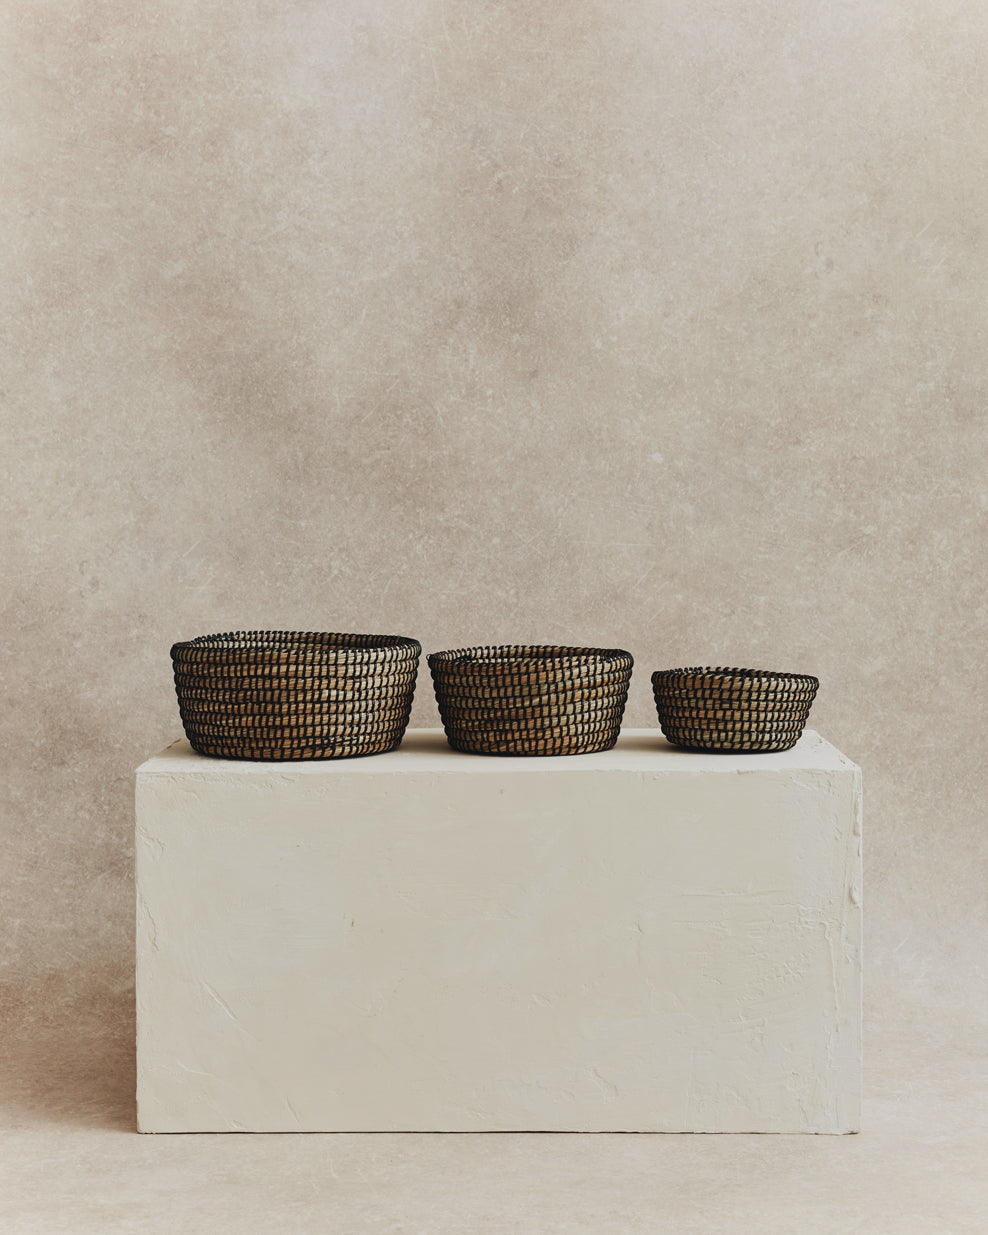 Woven Straw Baskets | Set of 3